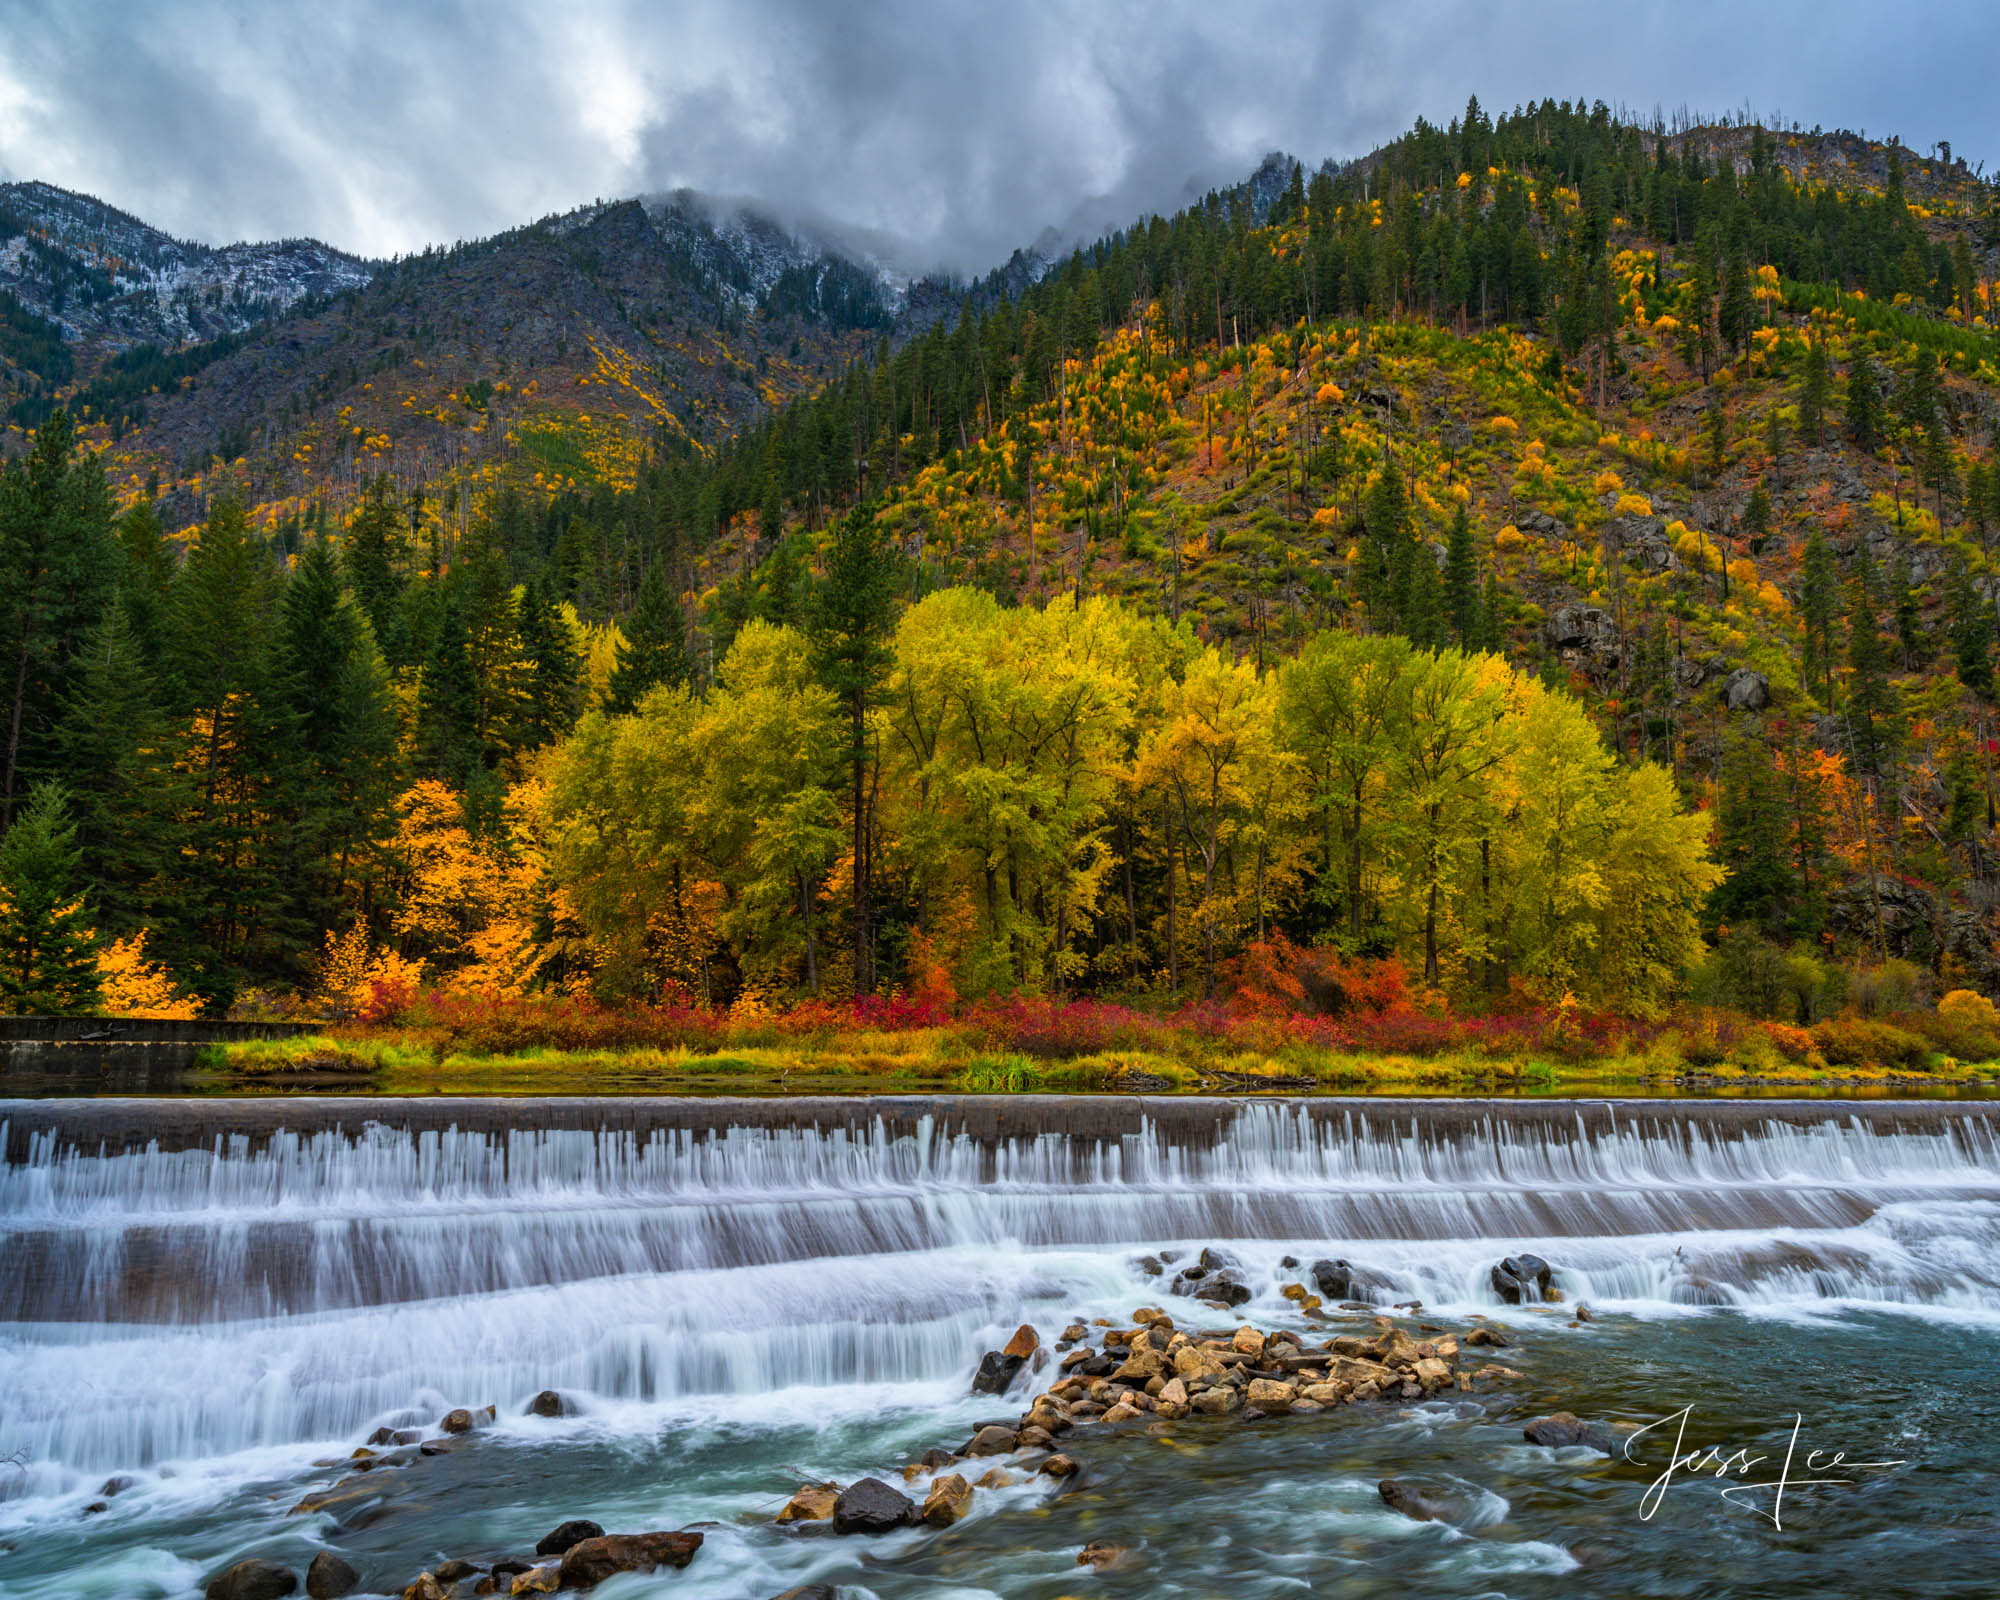 Fine Art Limited Edition Photography of Washington. Washington Autumn Landscapes, Rivers, waterways.This is part of the luxurious...